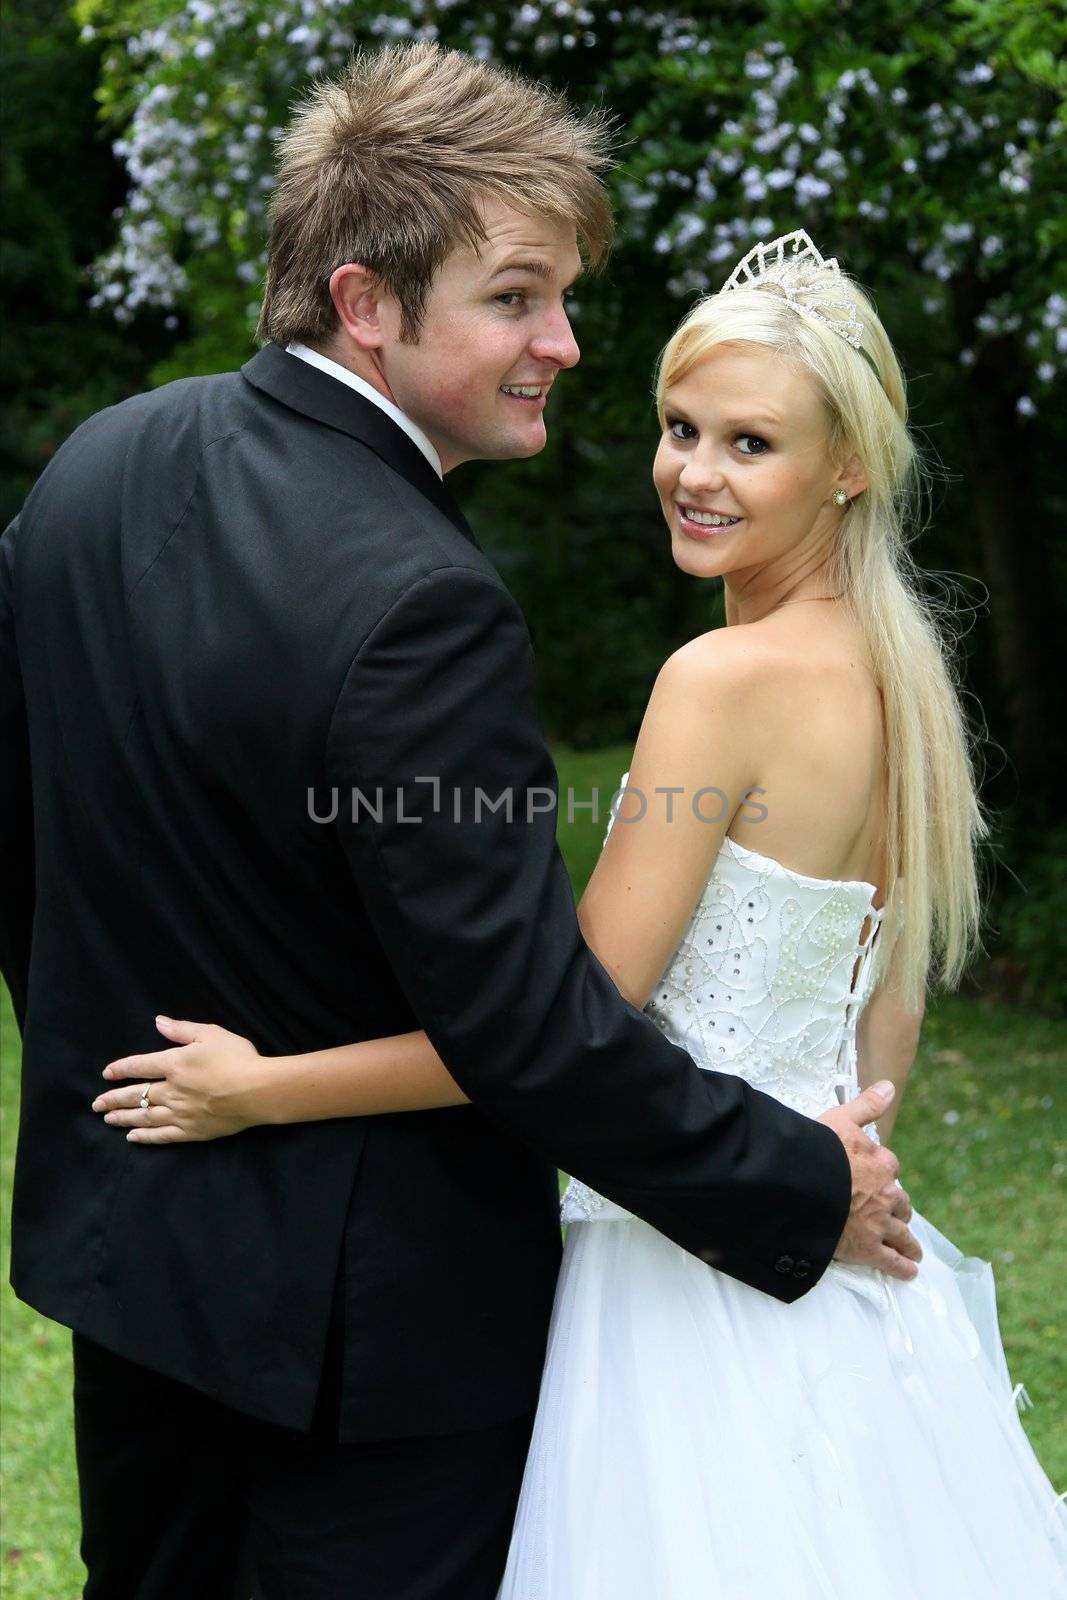 Lovely young wedding couple looking back and smiling